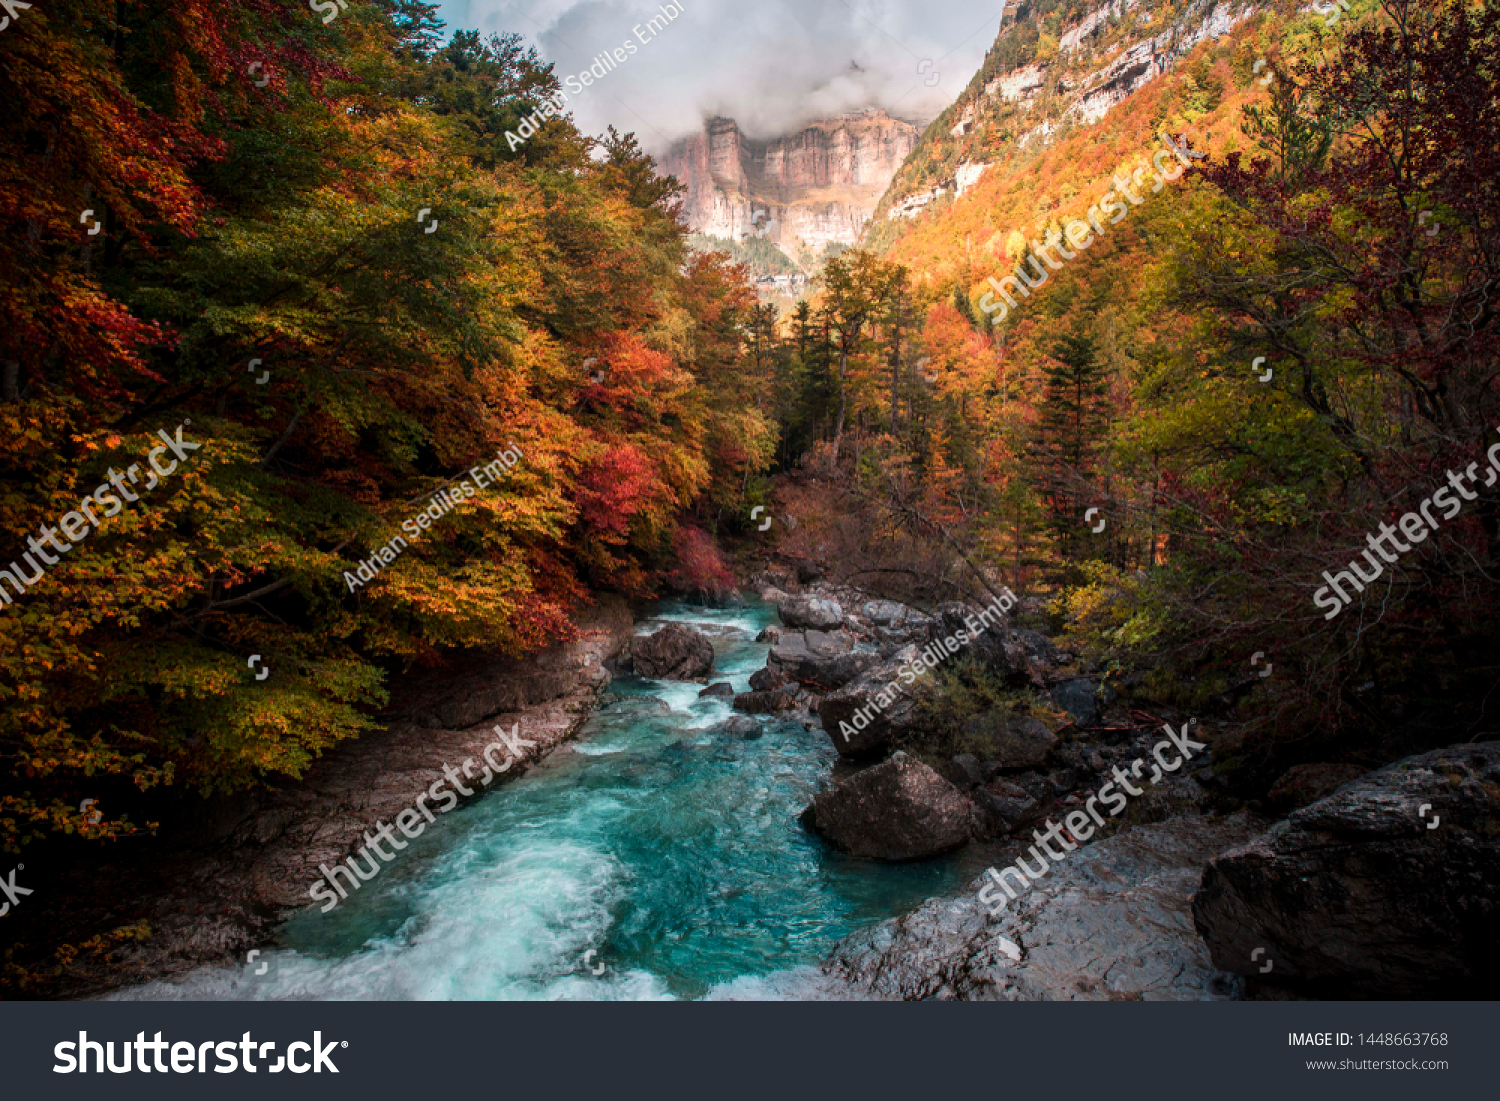 Photograph of the river Arazas on its way through the Ordesa valley, taken in autumn with those orange colors. #1448663768